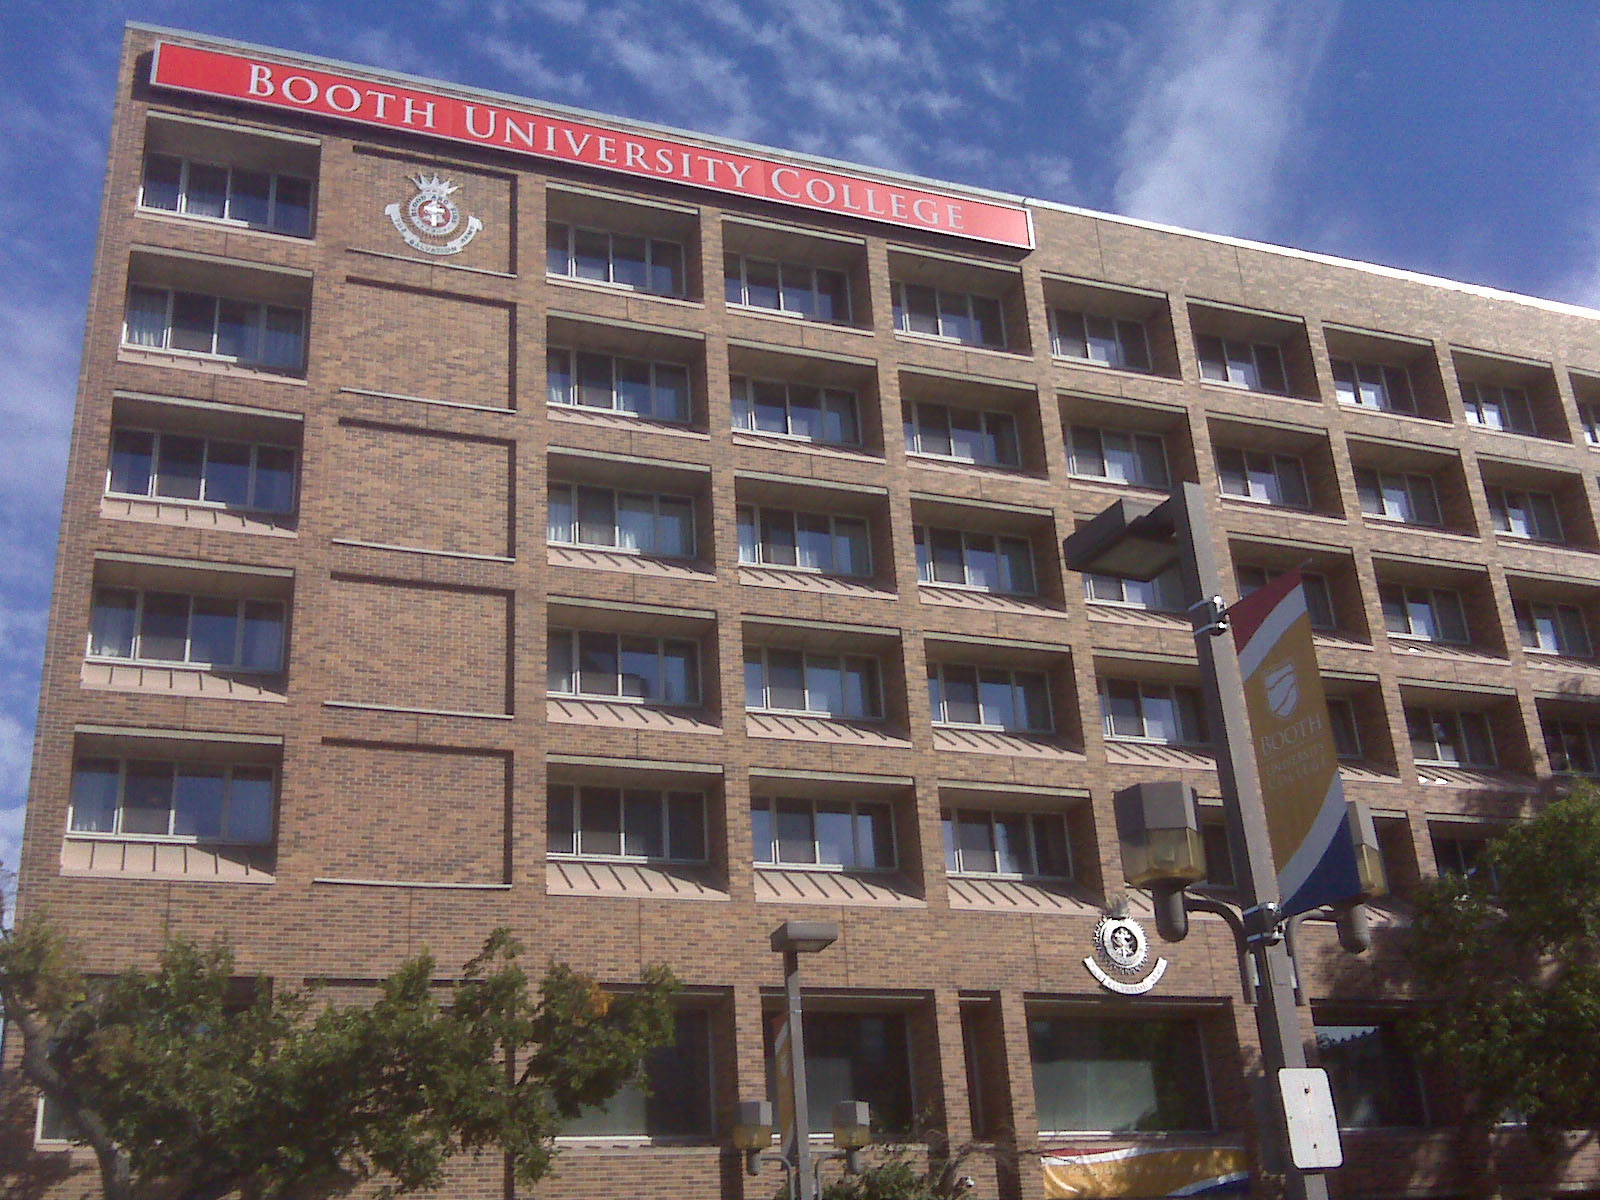 Seven-story brick building with a red sign for Booth University College.